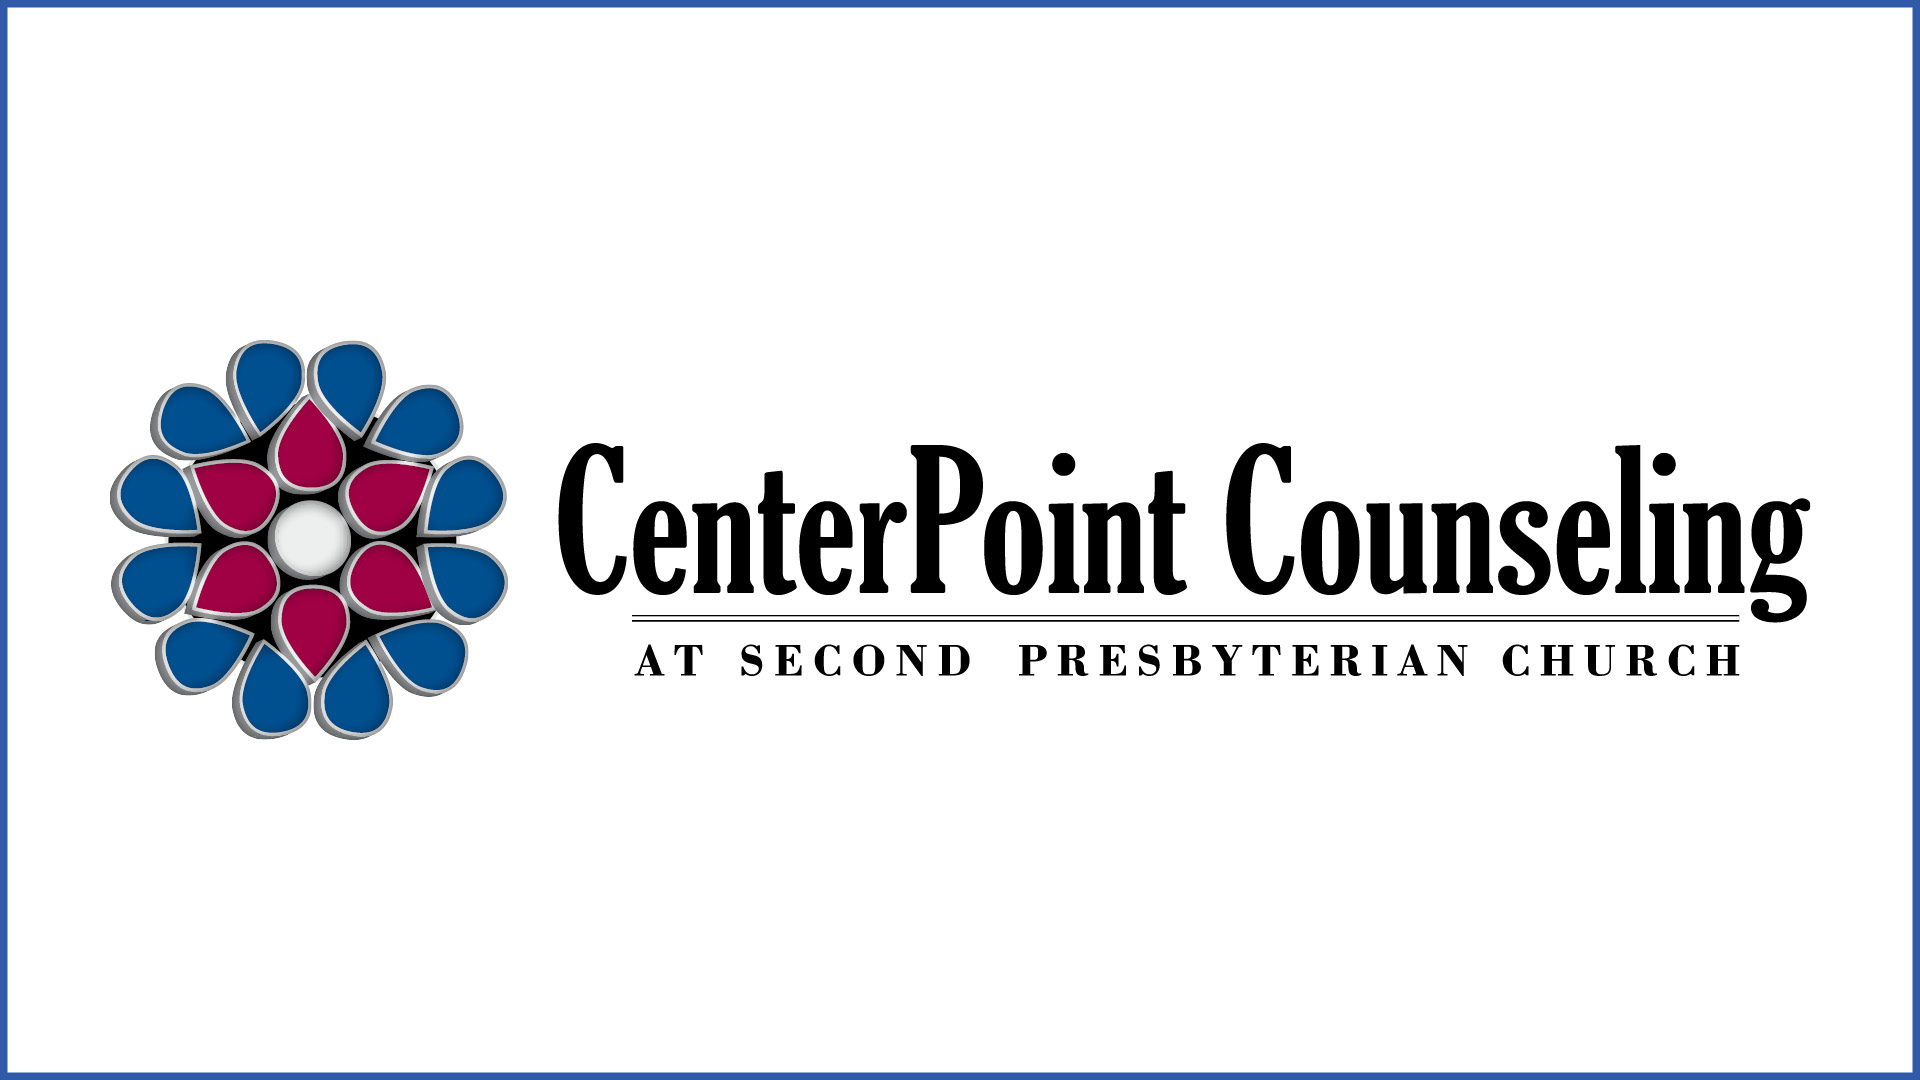 Executive Director, CenterPoint Counseling
